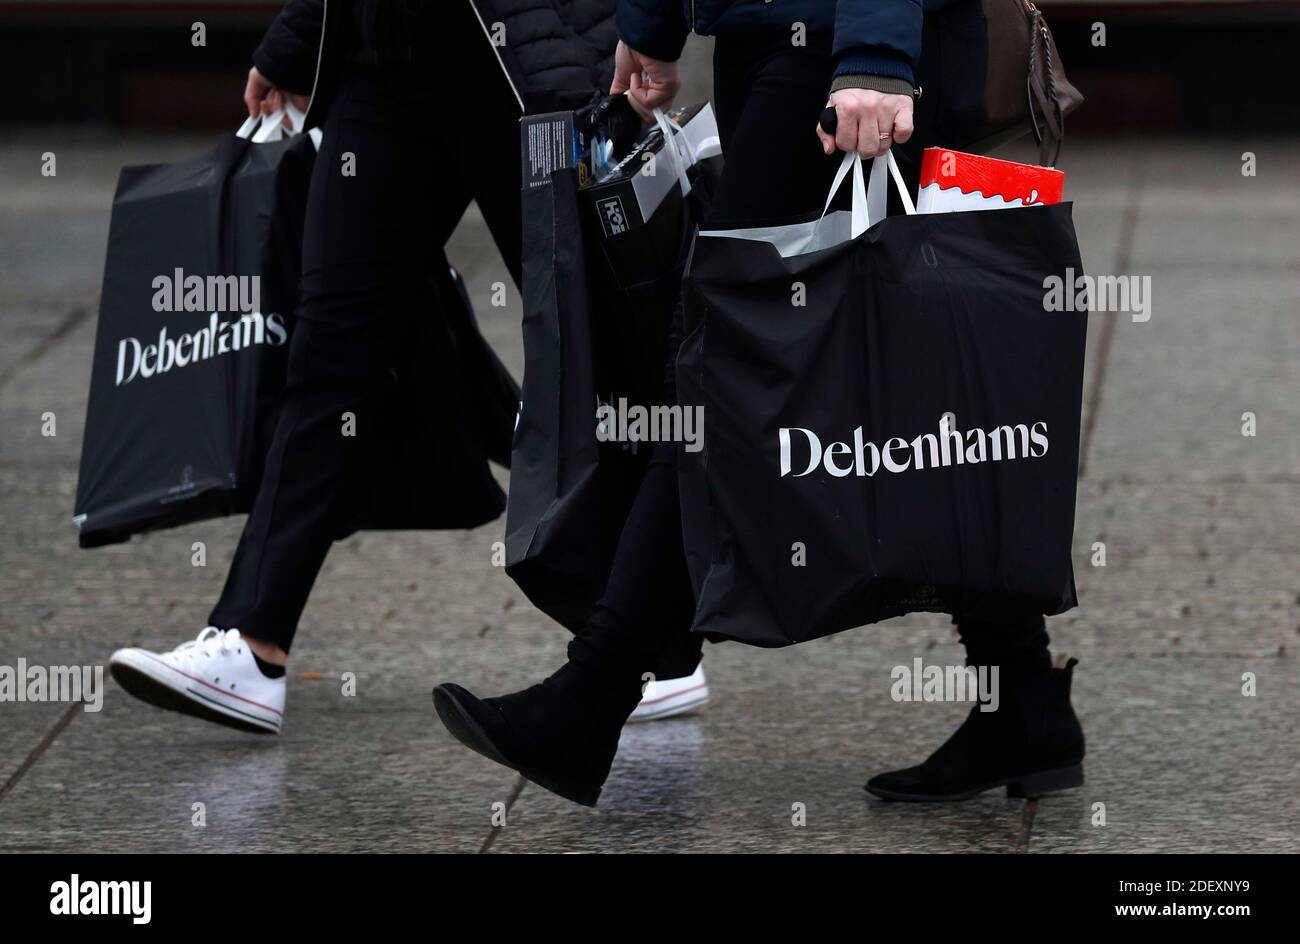 Nottingham, Nottinghamshire, UK. 2nd December 2020. Women carry  Debenhams bags after the department store chain collapsed but opened its stores for a stock clearance sale. Credit Darren Staples/Alamy Live News. Stock Photo